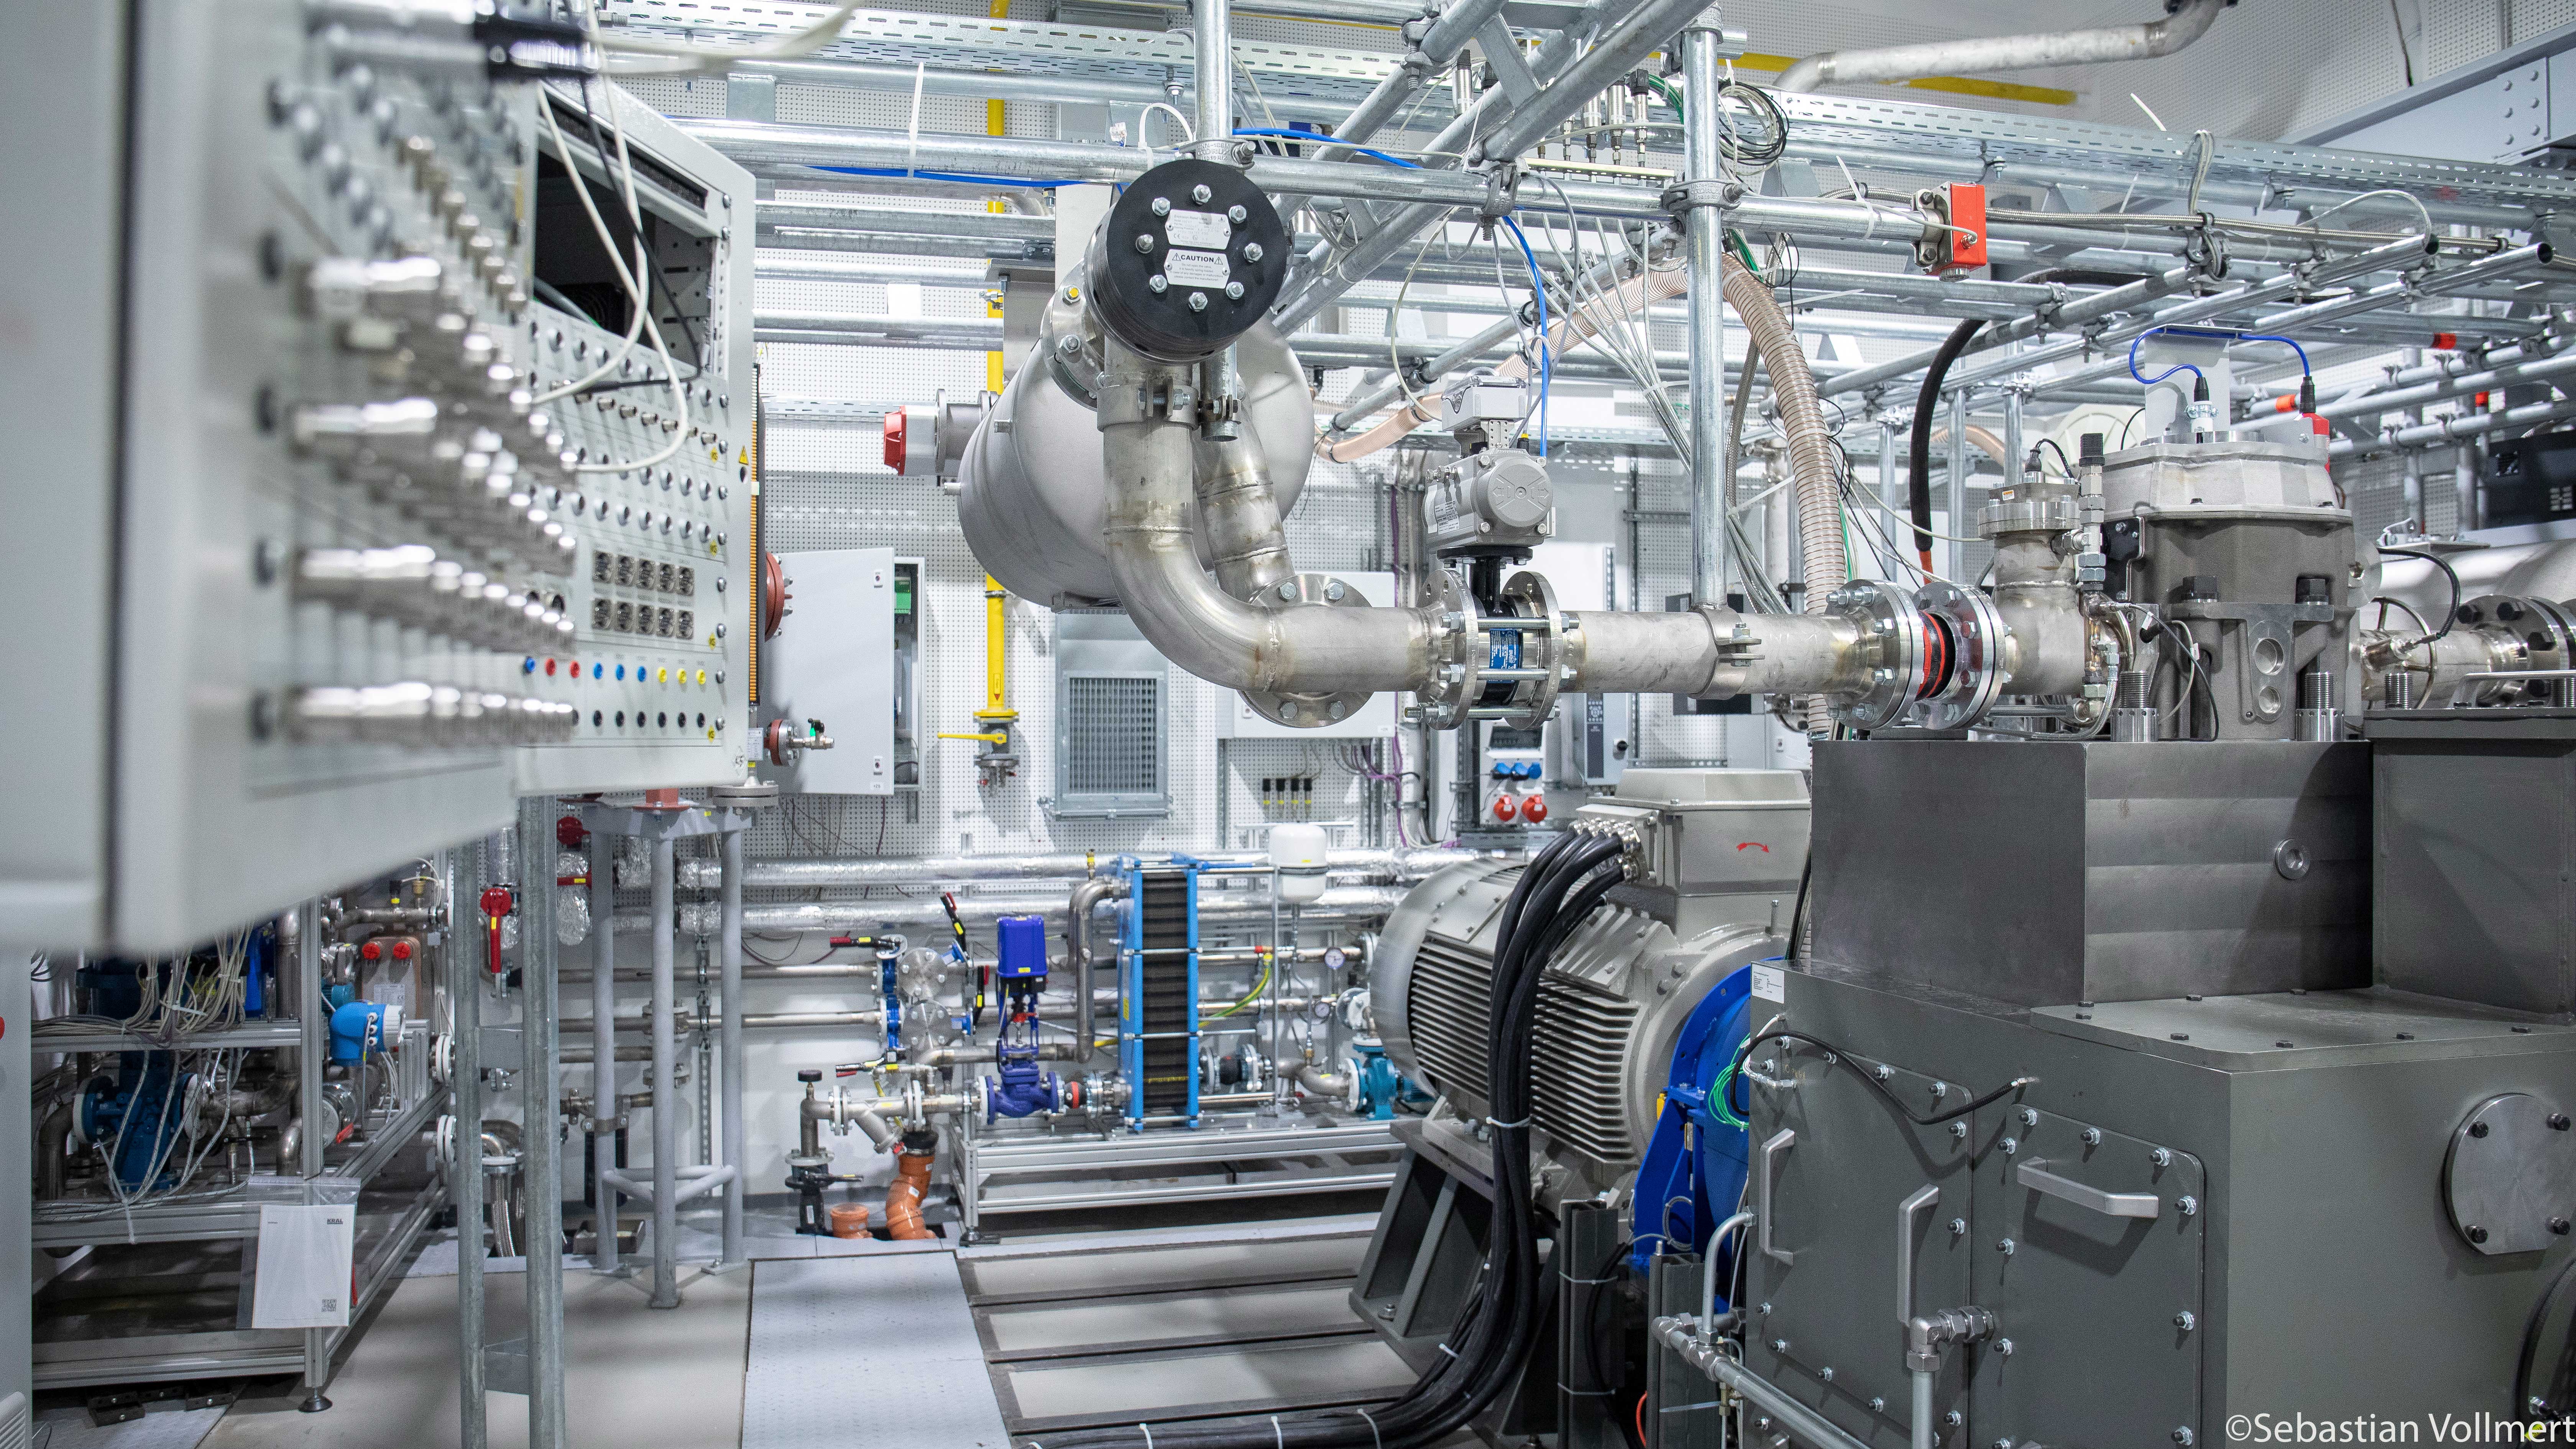 Test engines with alternative fuels in the test center in Dessau-Rosslau